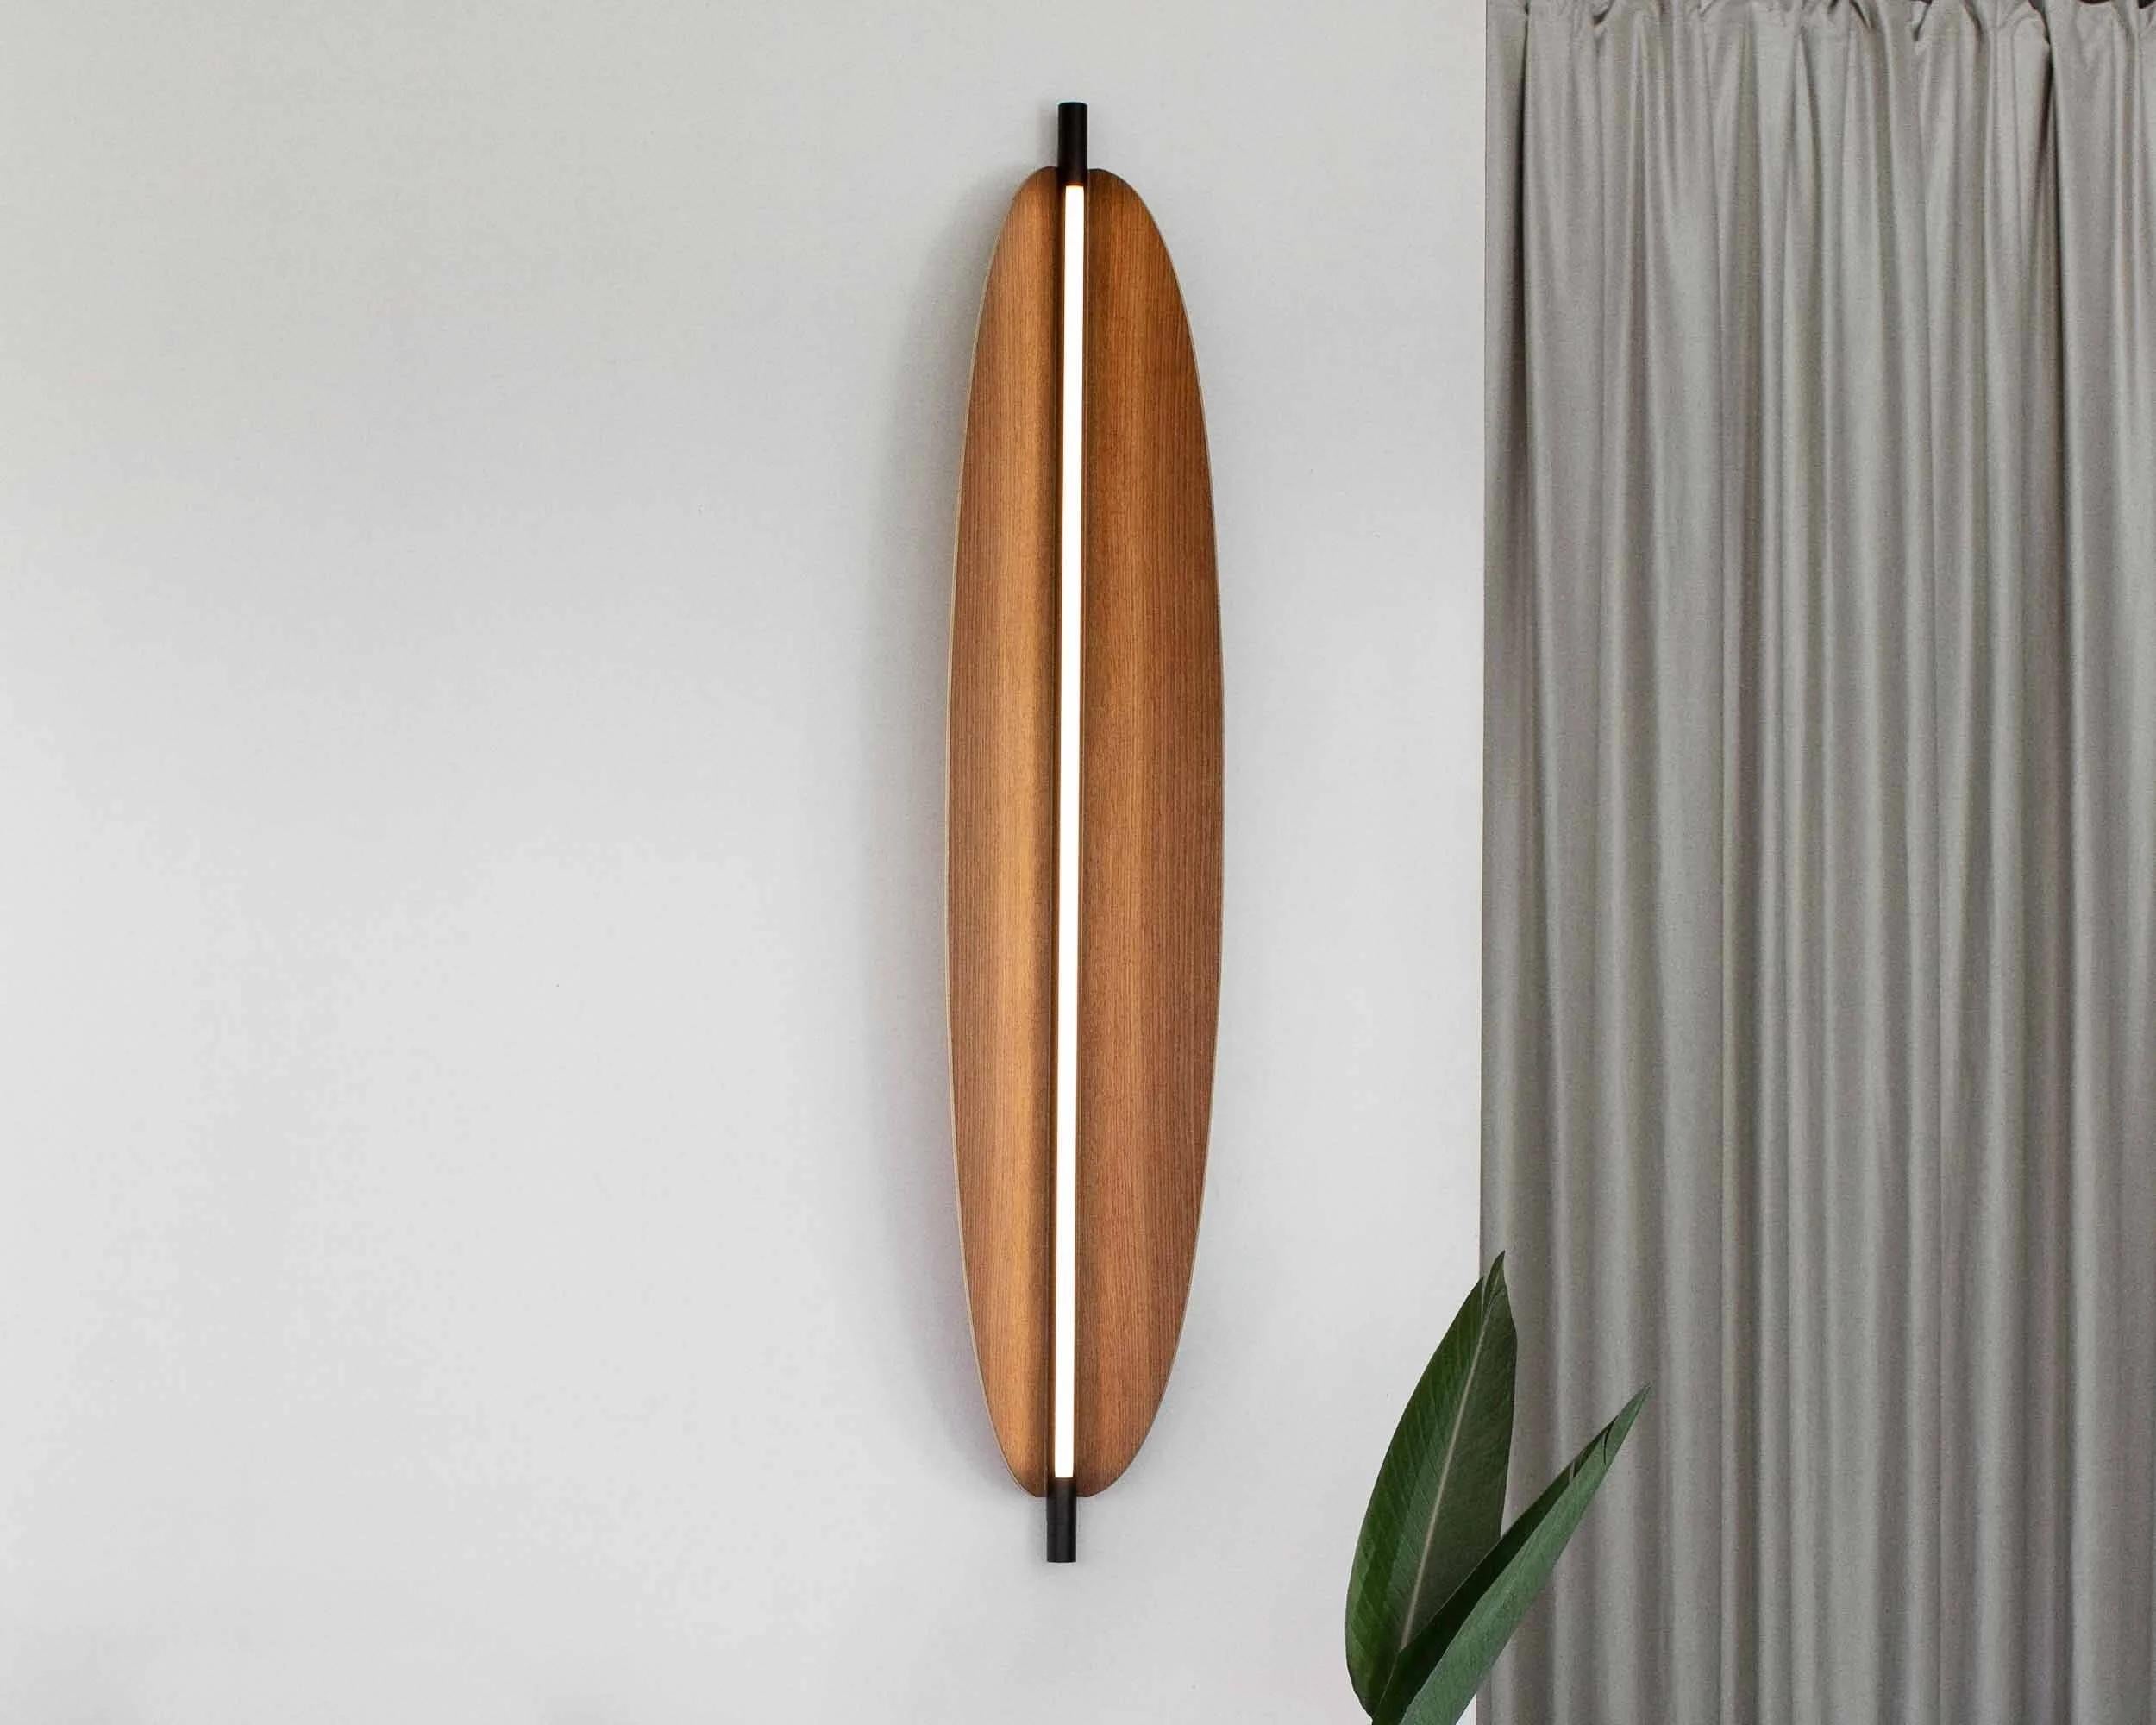 Contemporary Wall Lamp 'Thula 562.42' by Federica Biasi x Tooy, Black + Walnut For Sale 6